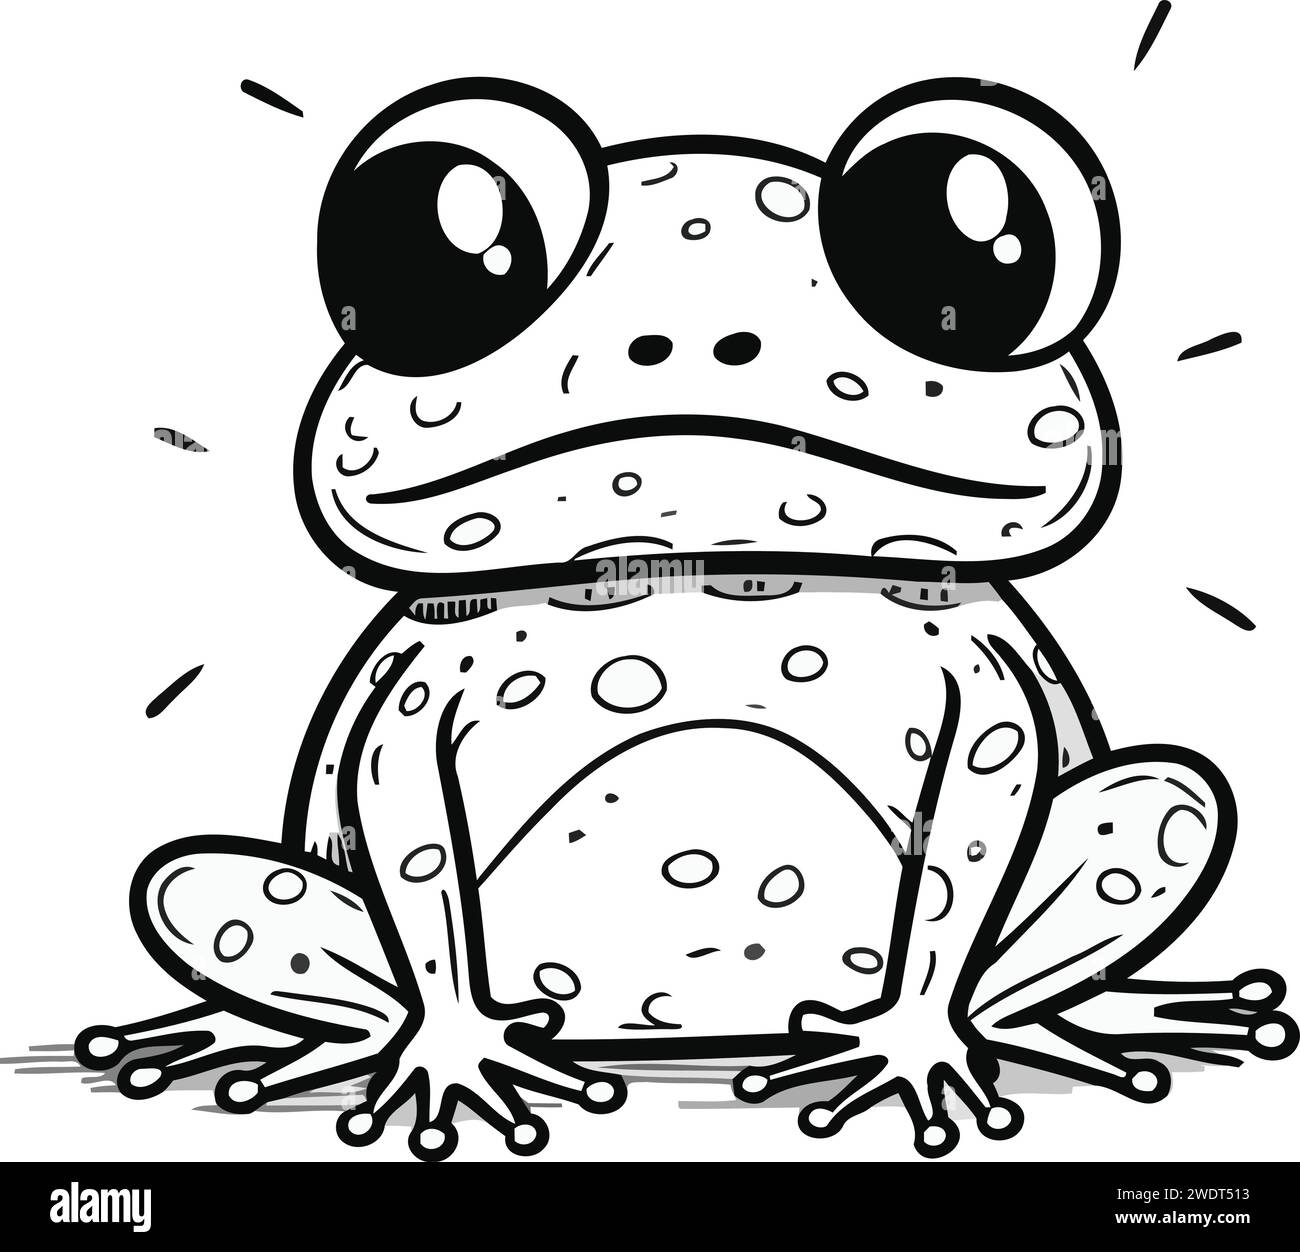 Frog. Hand drawn vector illustration isolated on a white background. Stock Vector